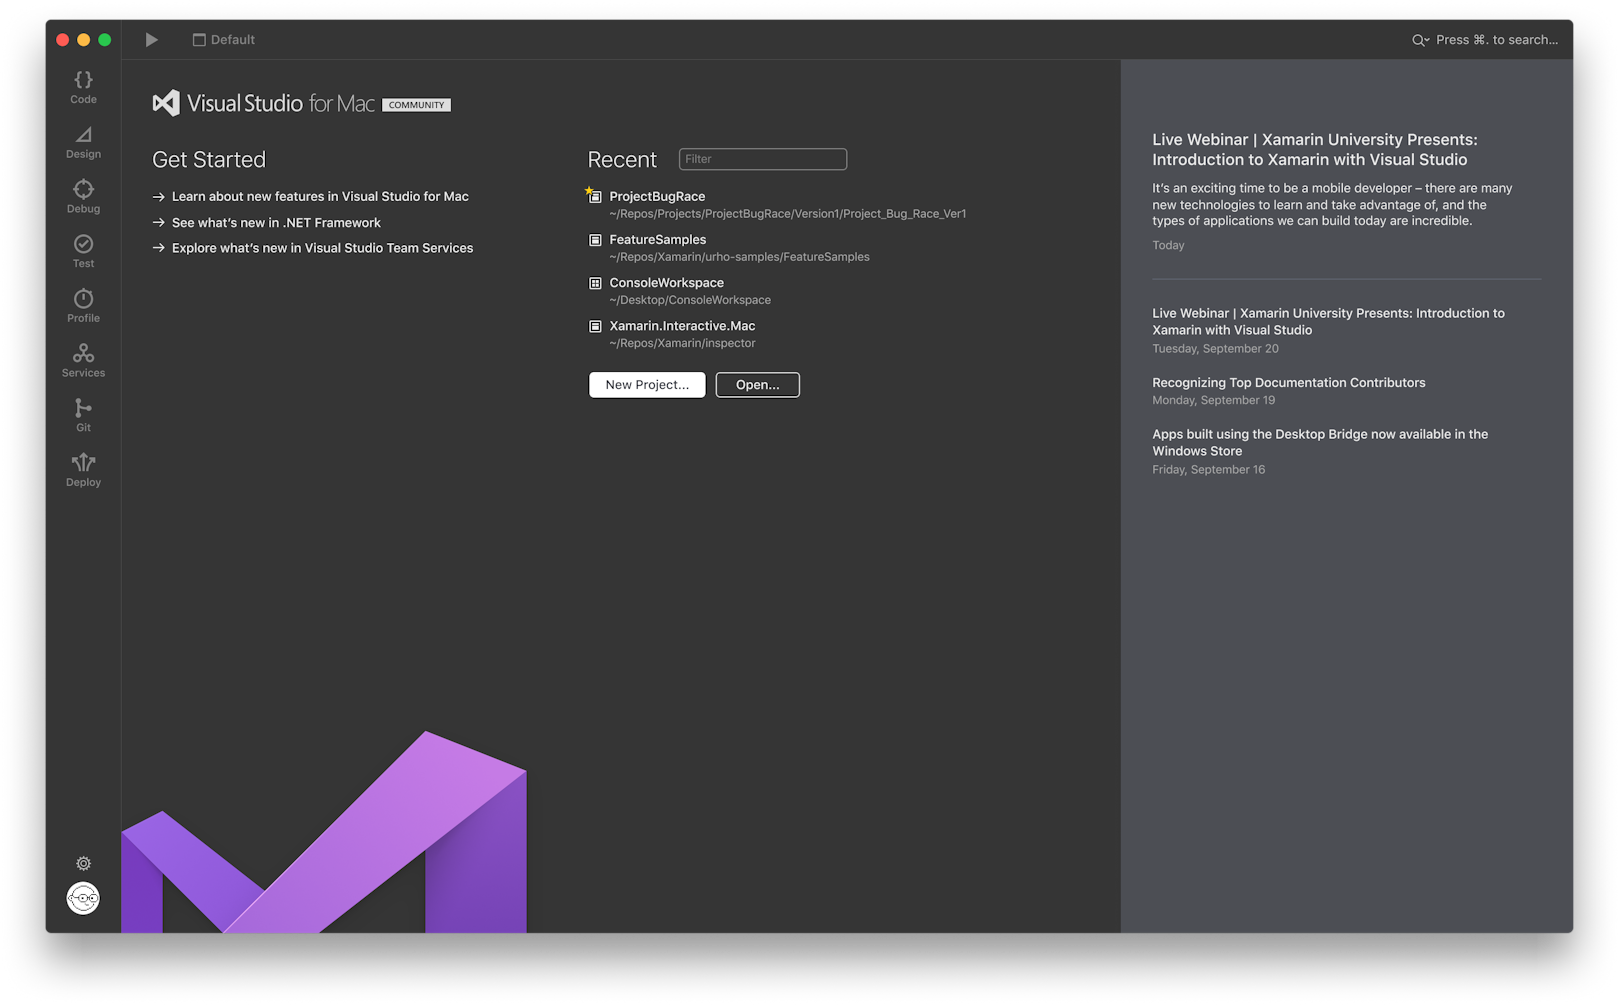 Welcome Screen of experimental Visual Studio for Mac showing recent projects and a sidebar with options to learn about new features, explore .NET Framework and Team Services updates, alongside a list of webinars and announcements.